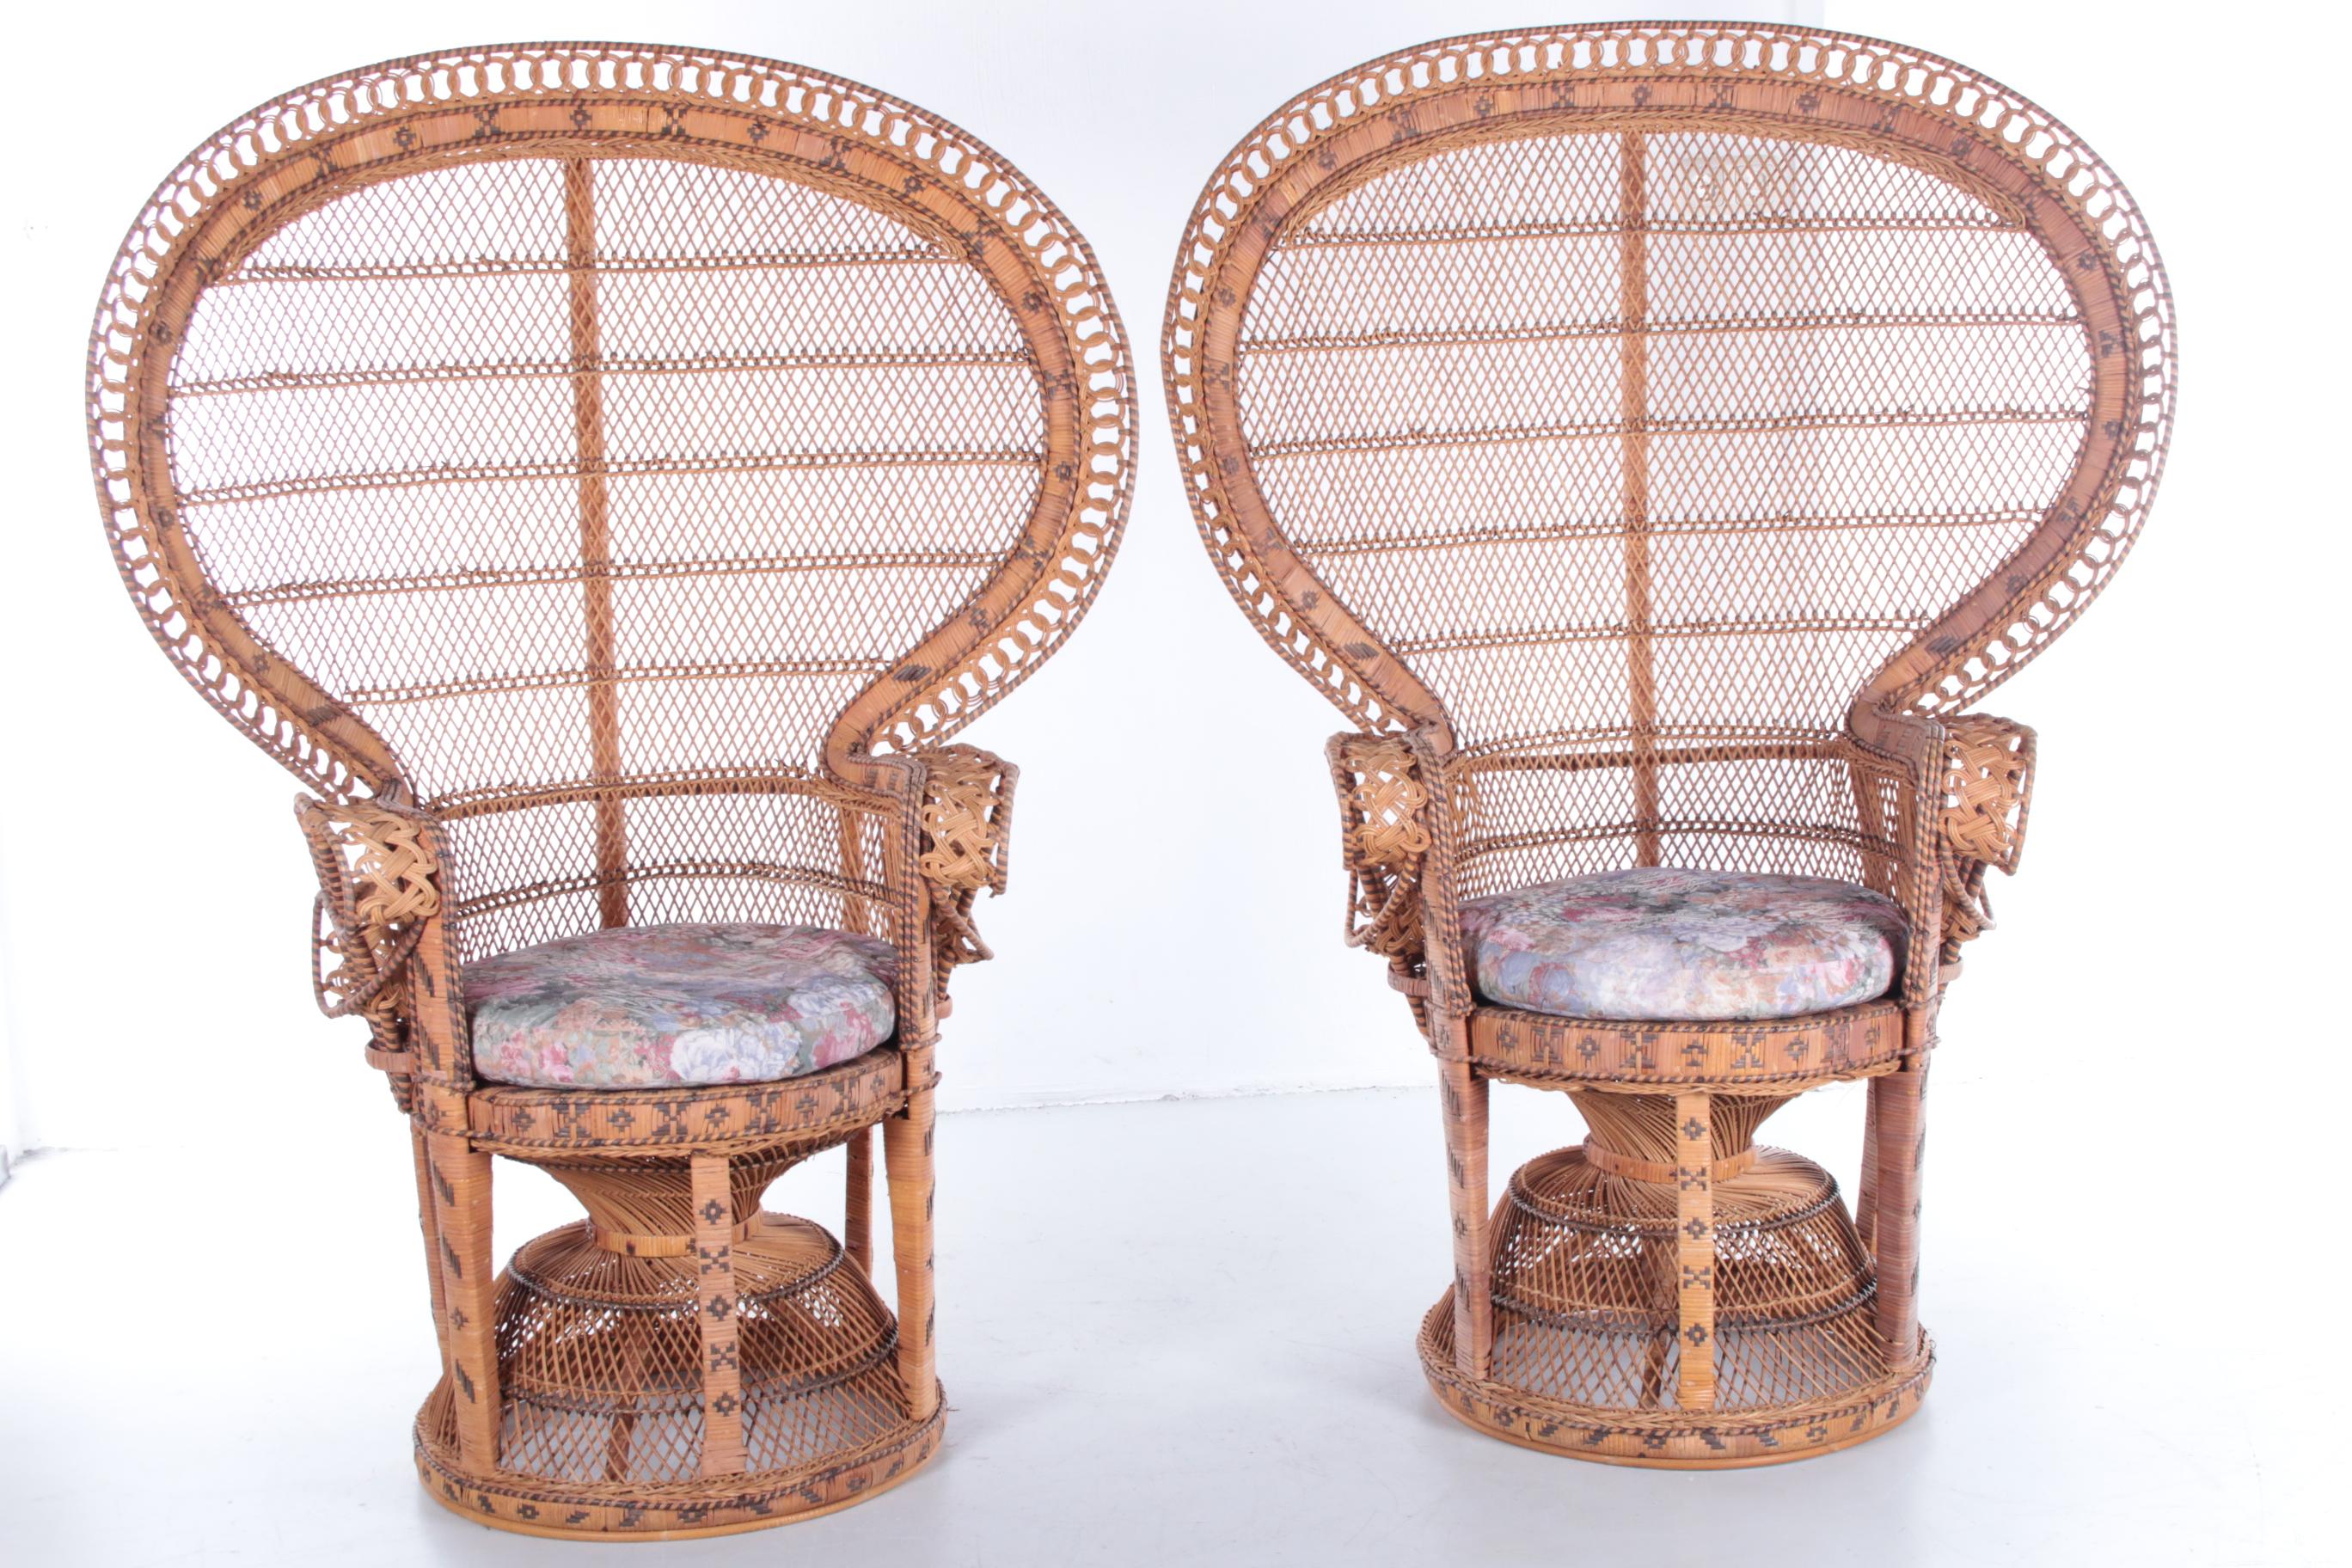 Set of two King Sized Emmanuelle Peacock Chairs with side table


A beautiful set of two king sized Emmanuelle peacock chairs with a matching side table. The set is made by the famous furniture company Kok Maison which is known for their bamboo and